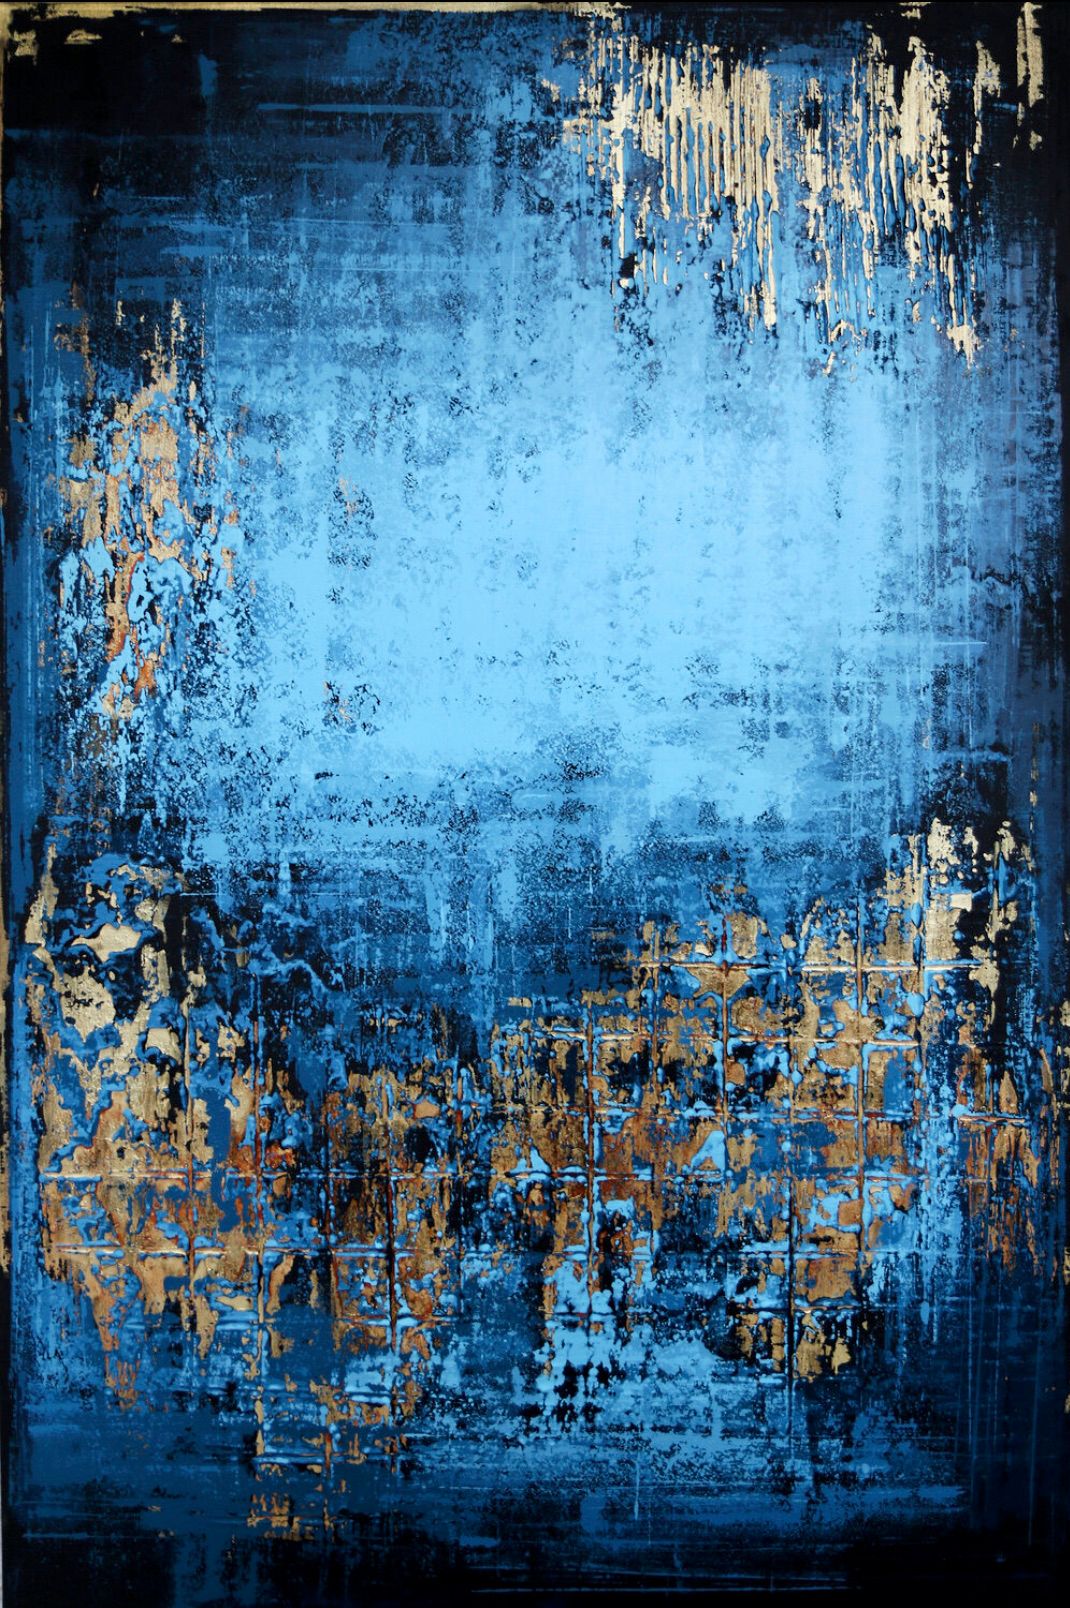 In Inez Froehlich's "MIDSUMMER NIGHT" abstract painting the colours dominate, copper, gold, blue, blue and blue. The style of the painting is shabby chic, industrial style, vintage, retro, boho, rustic.